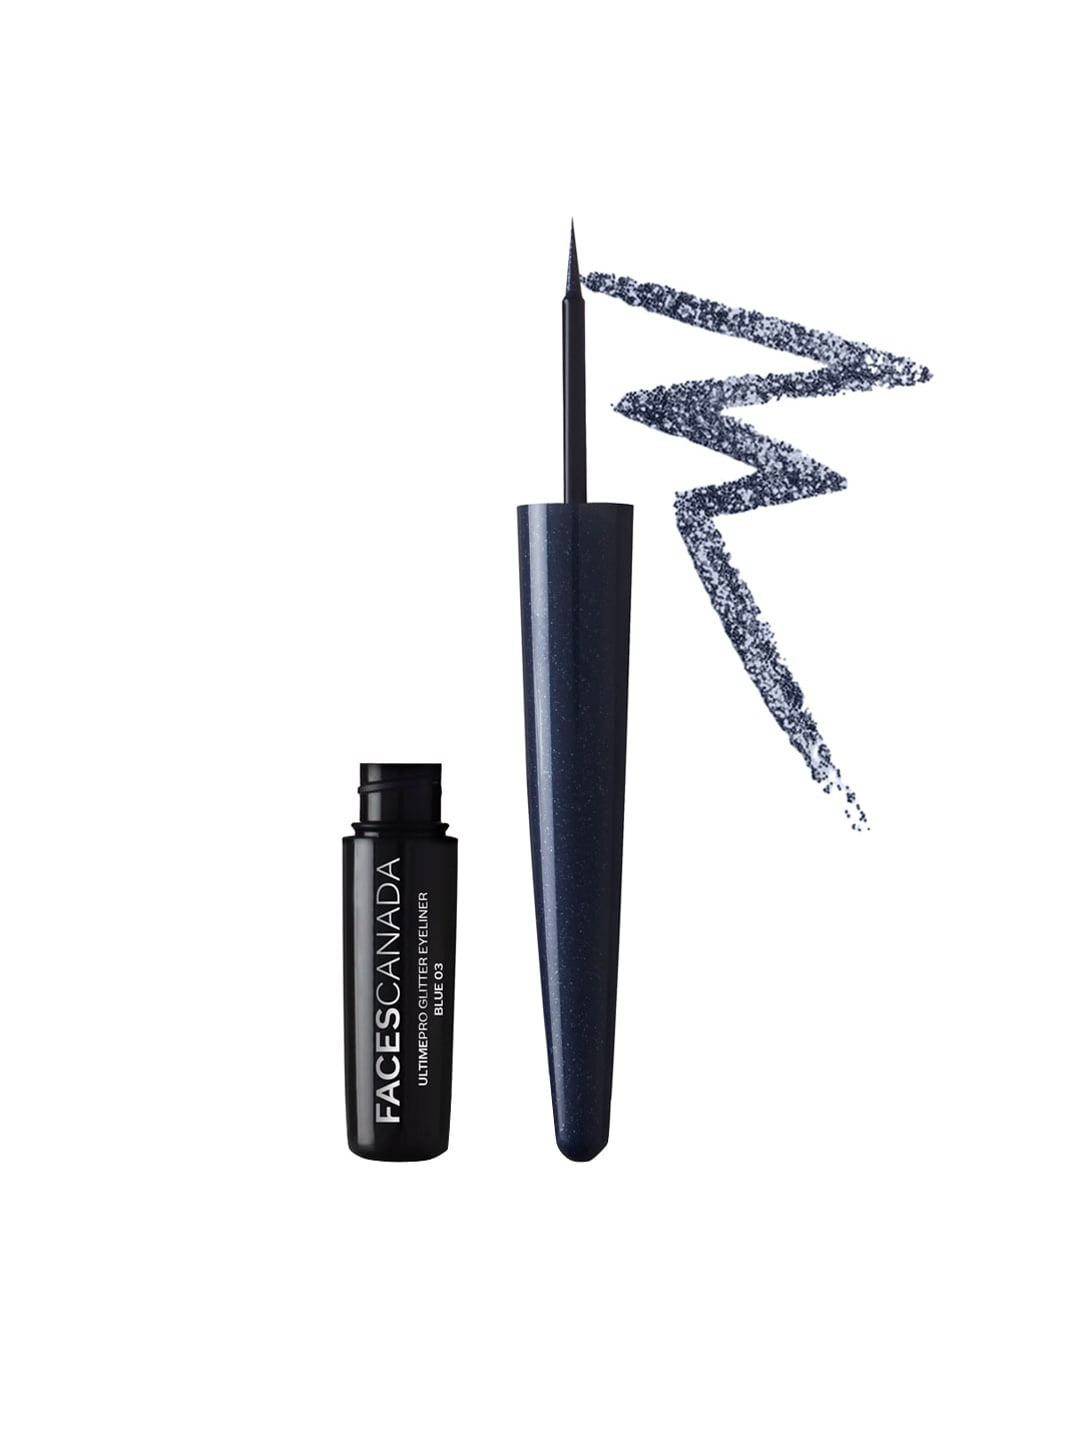 FACES CANADA Ultime Pro Glitter Eyeliner Blue 03 - 1.7ml Price in India